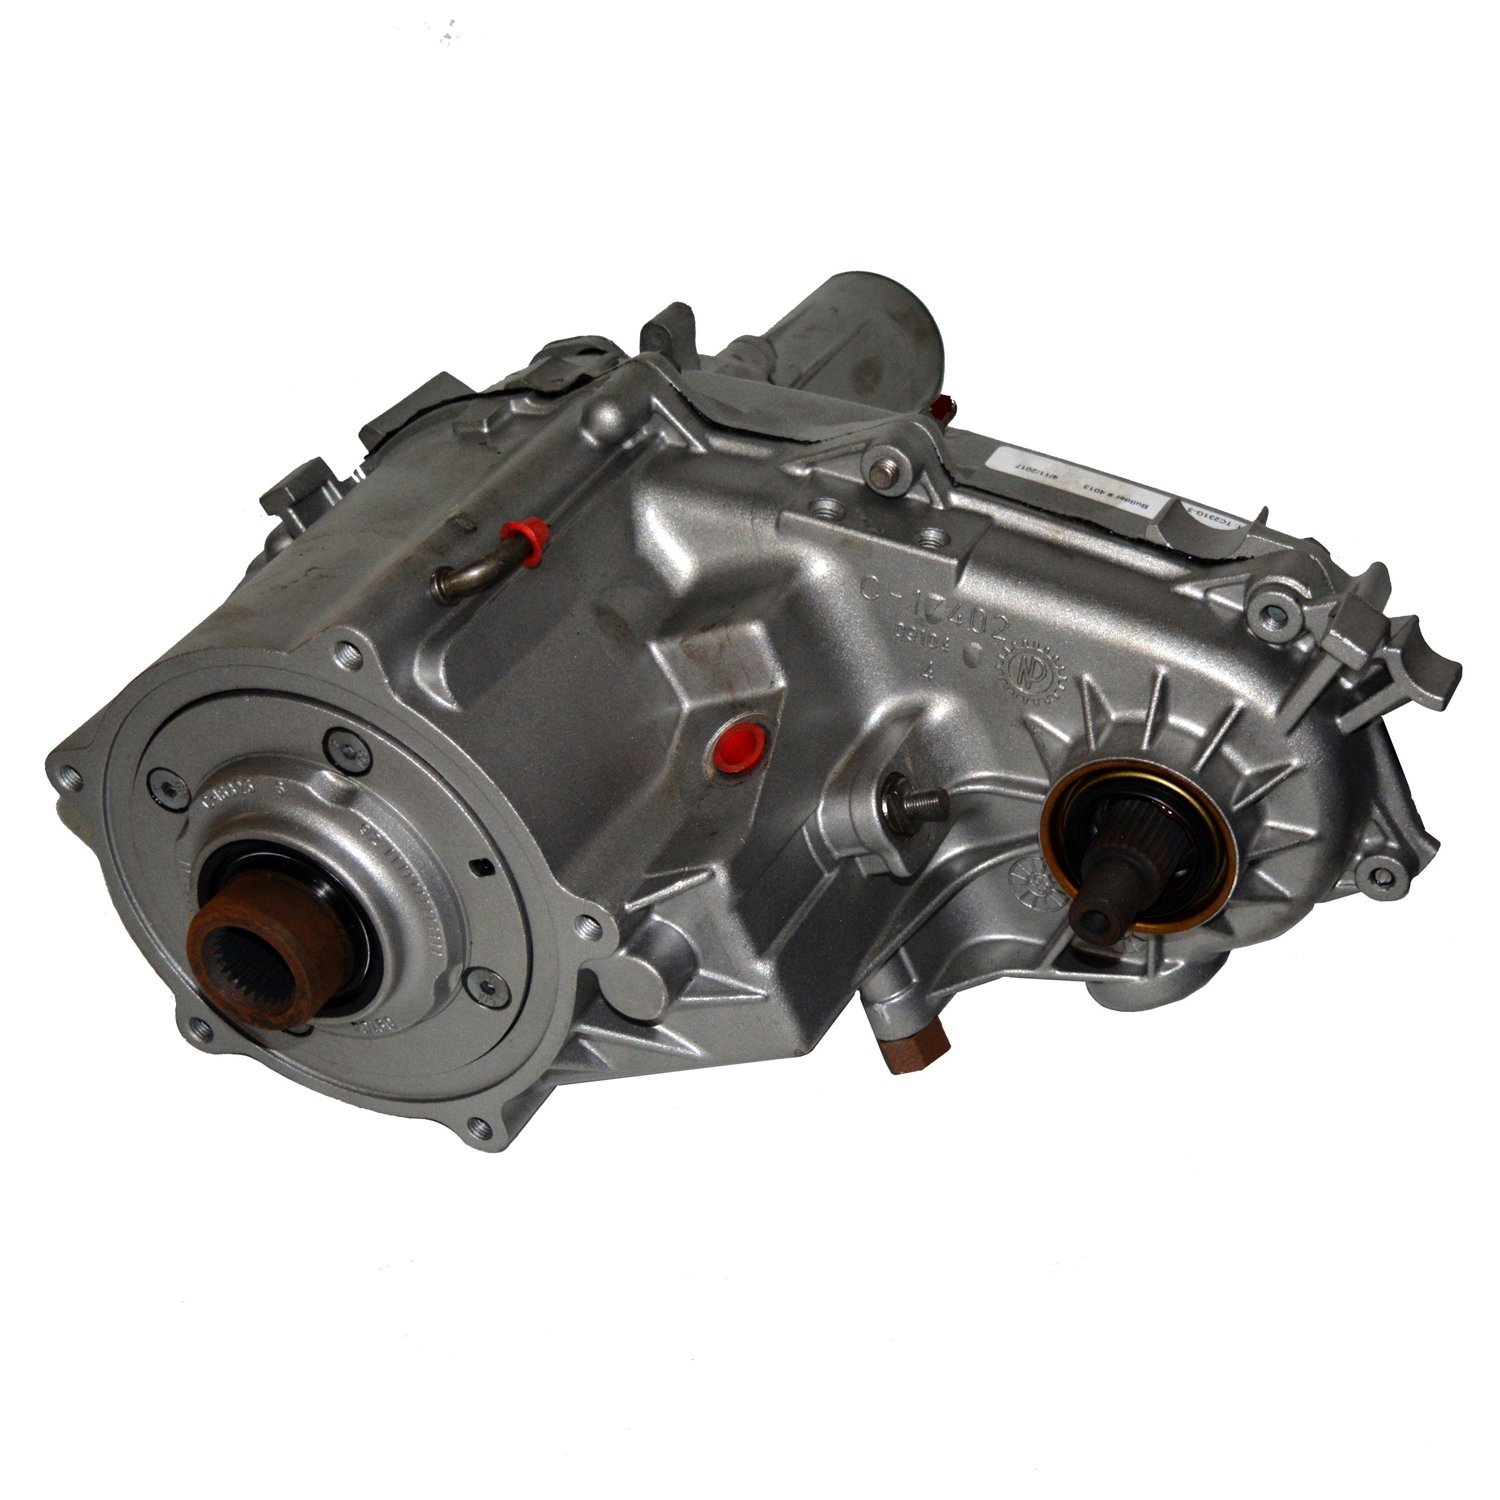 Remanufactured NP231 Transfer Case for GM 1998 S10 & S15